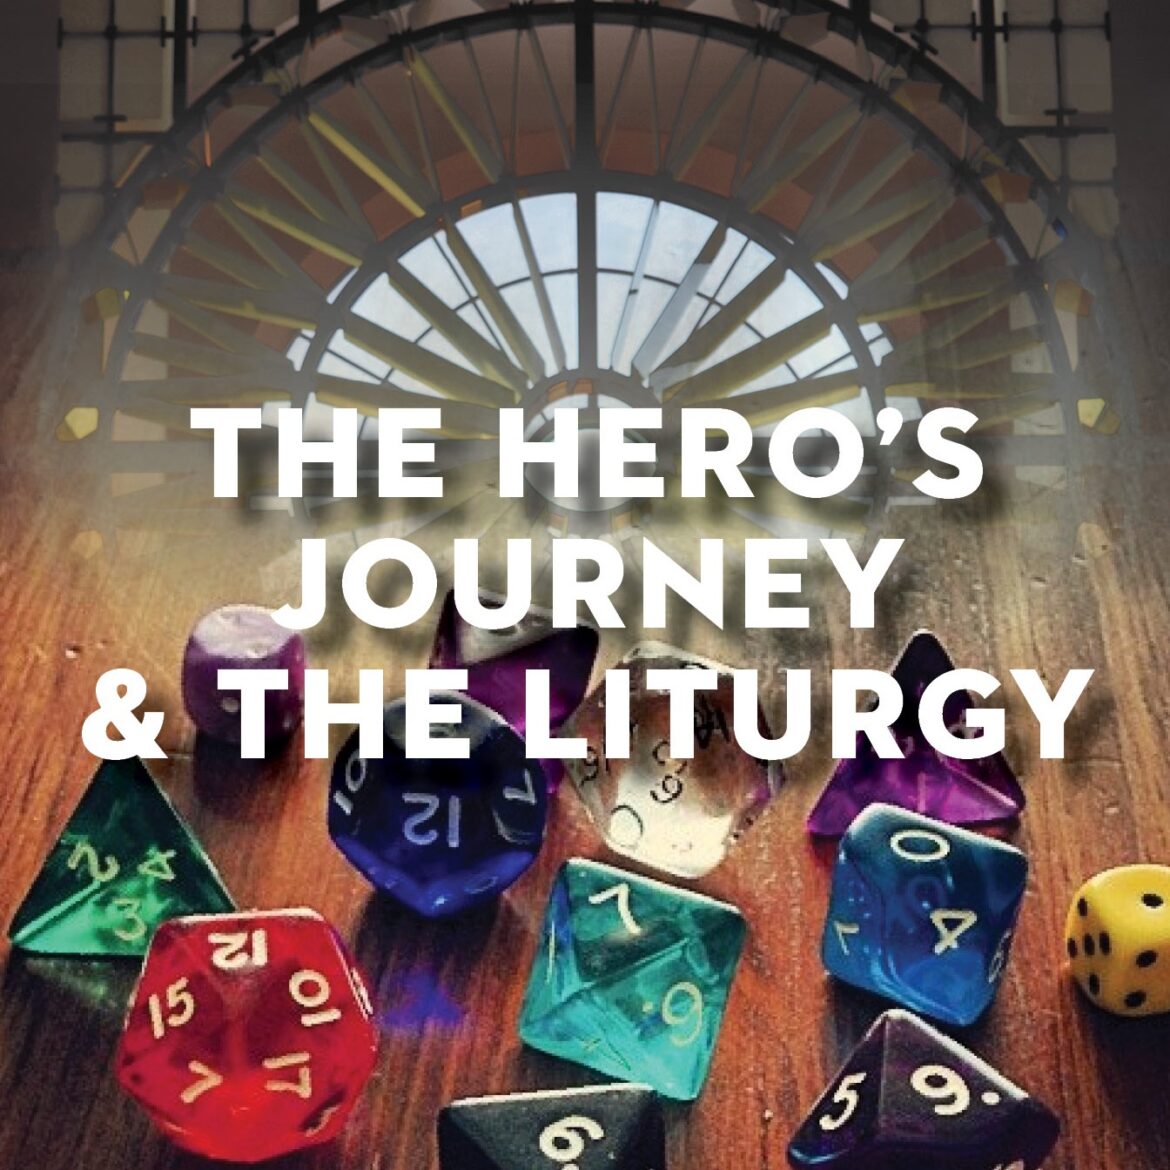 The Hero’s Journey and the Liturgy